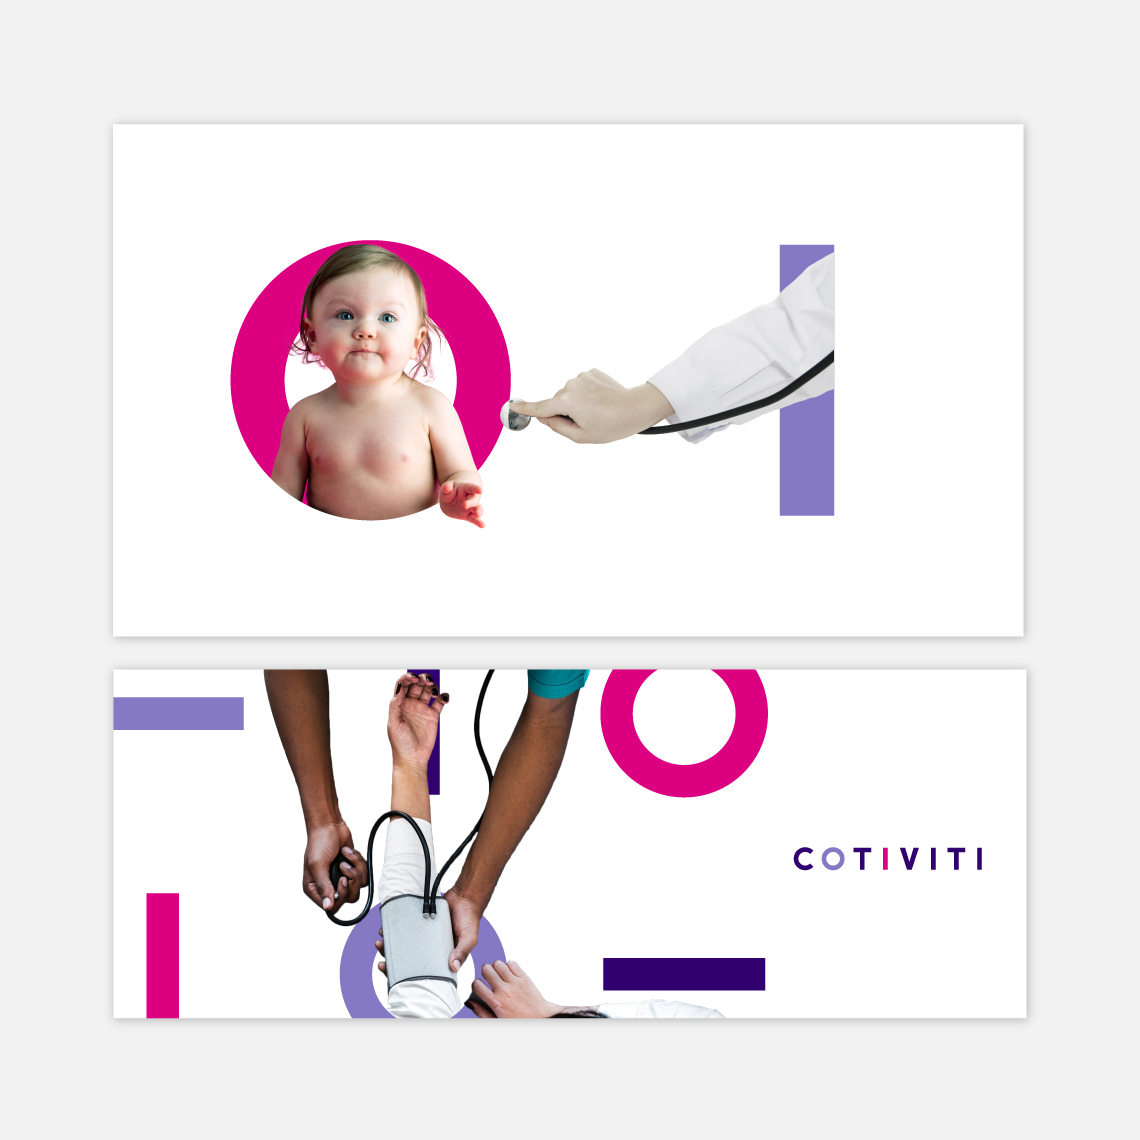 two horizontal banners showing examples of the brand identity developed for Cotiviti